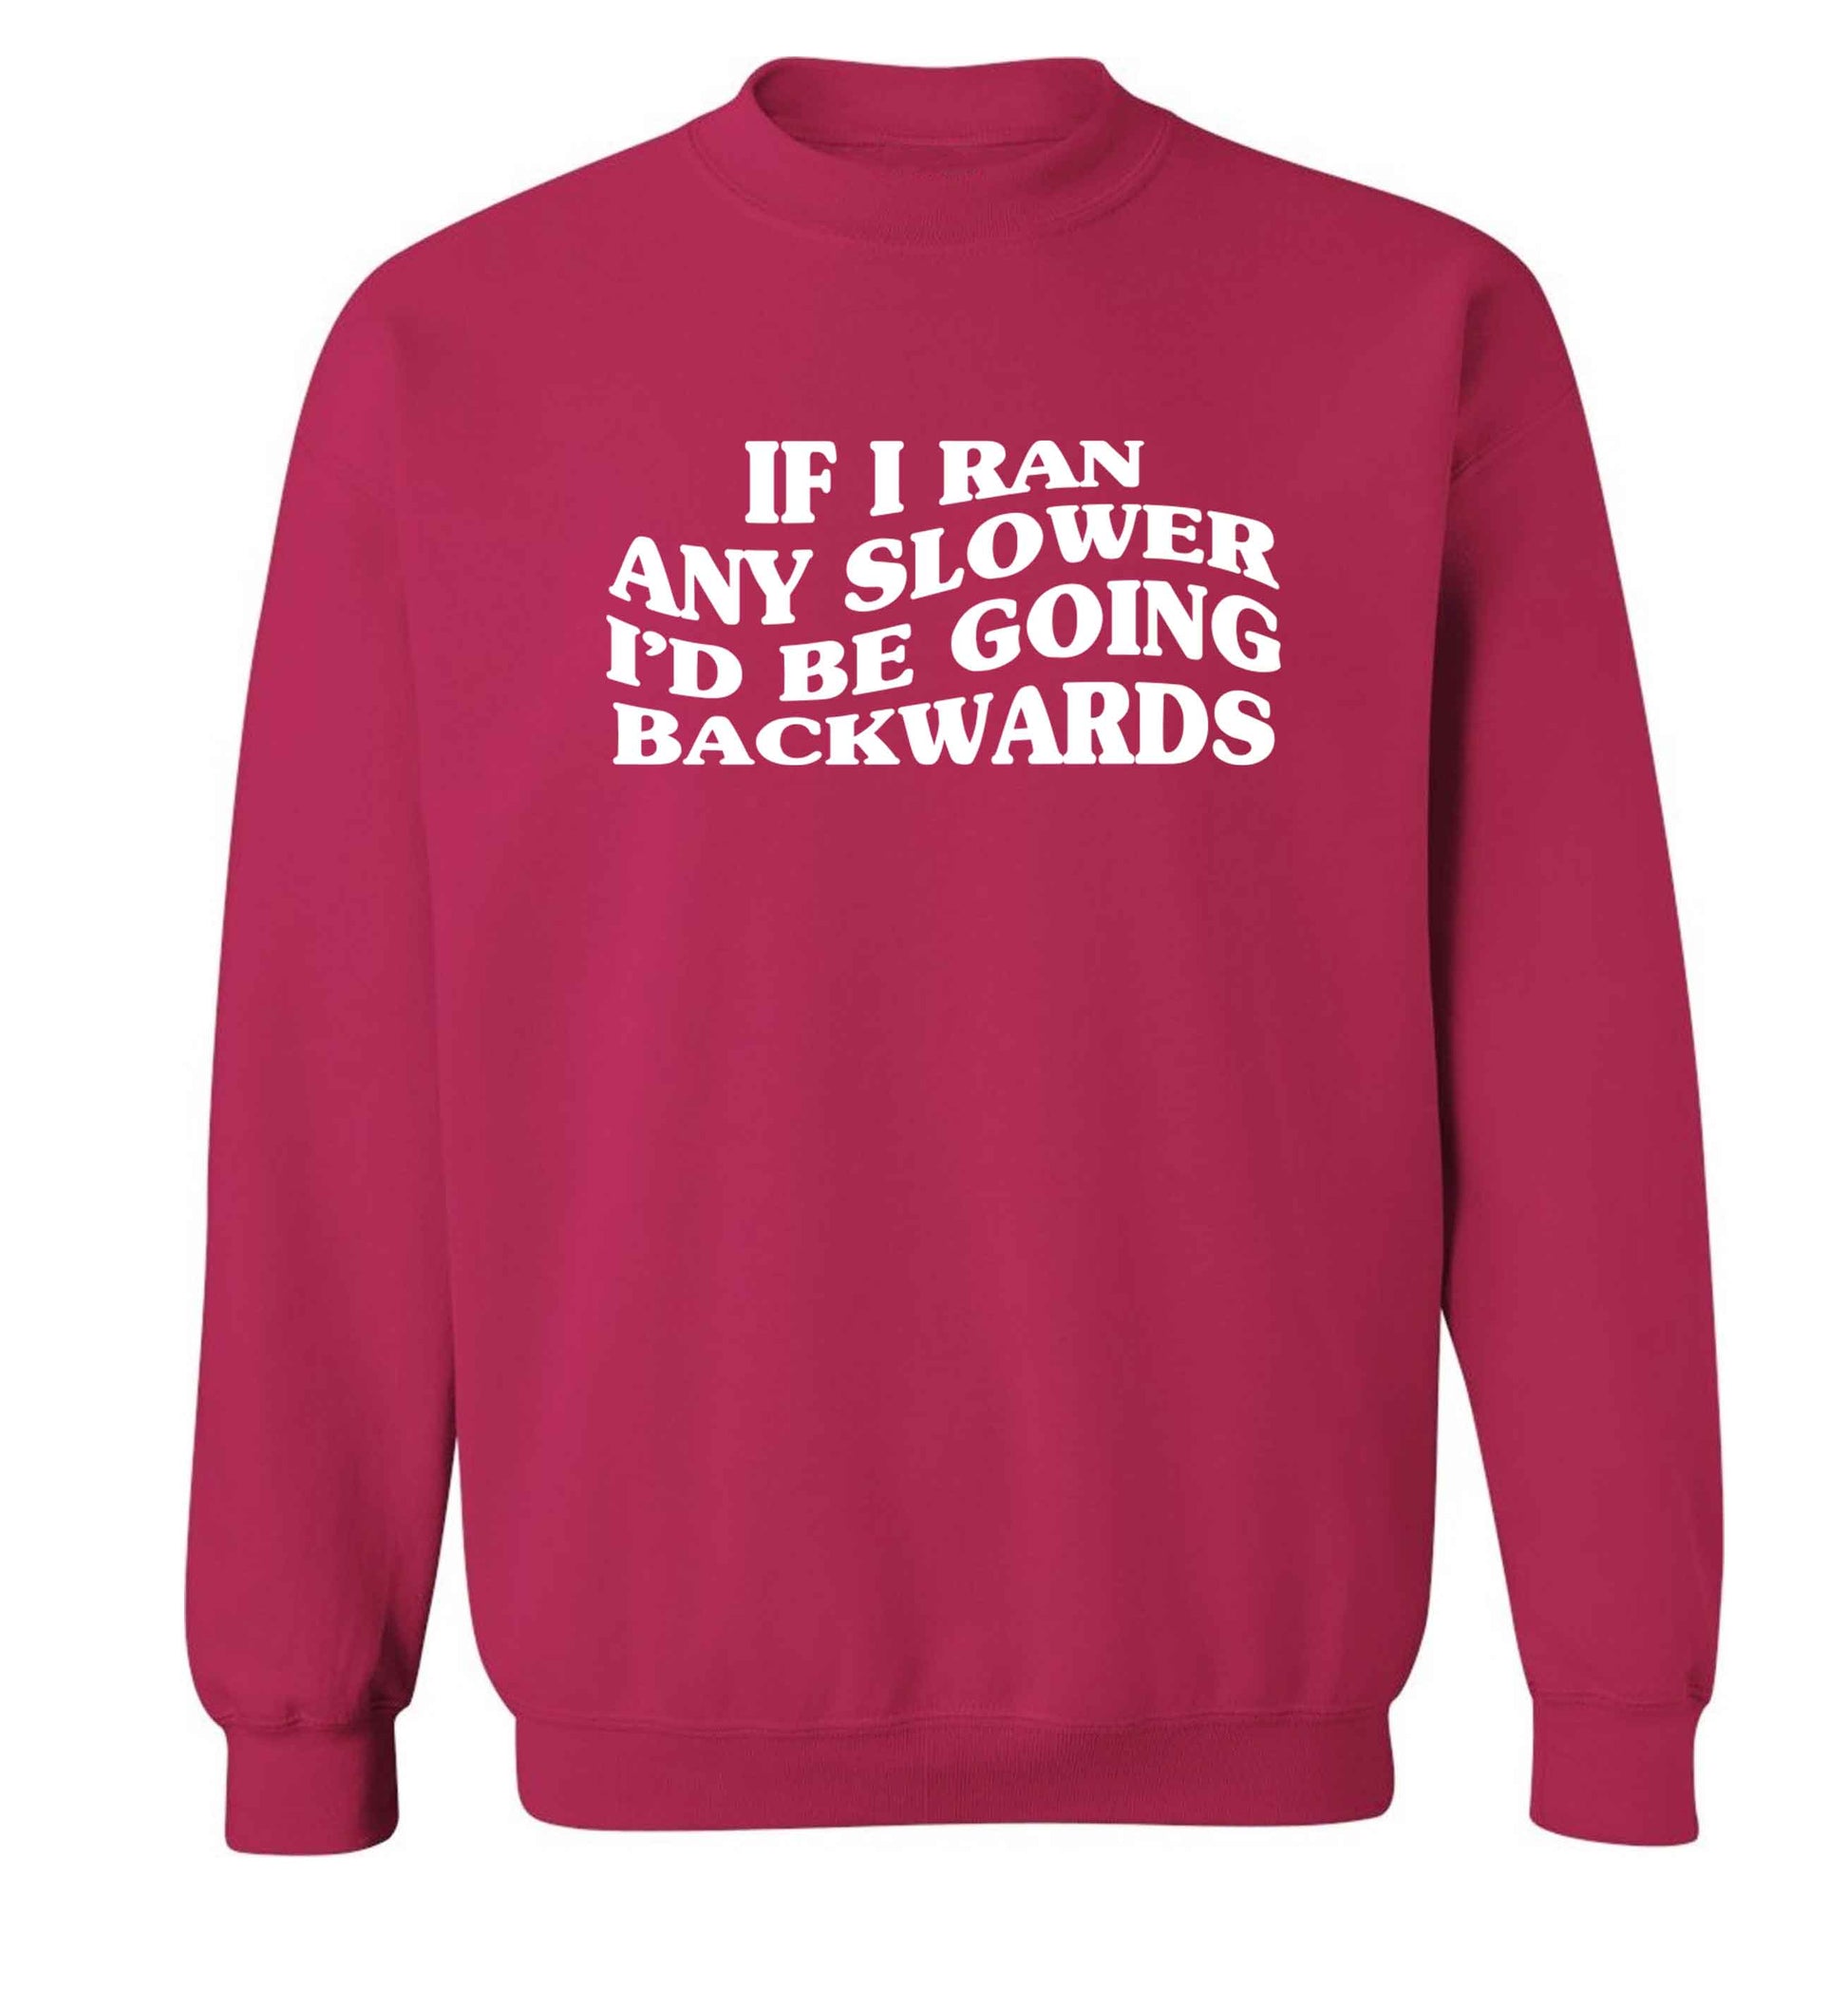 If I ran any slower I'd be going backwards adult's unisex pink sweater 2XL